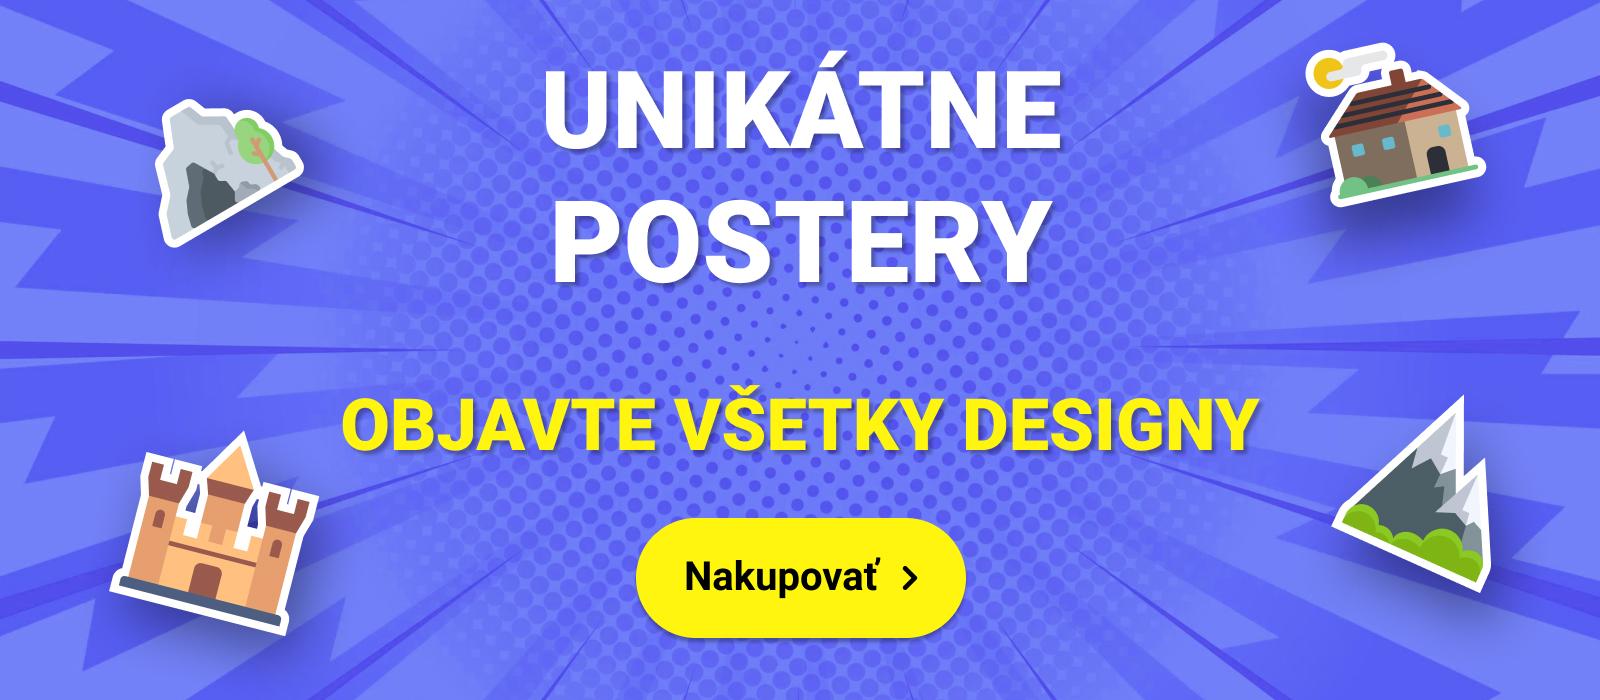 banner unikatne postery